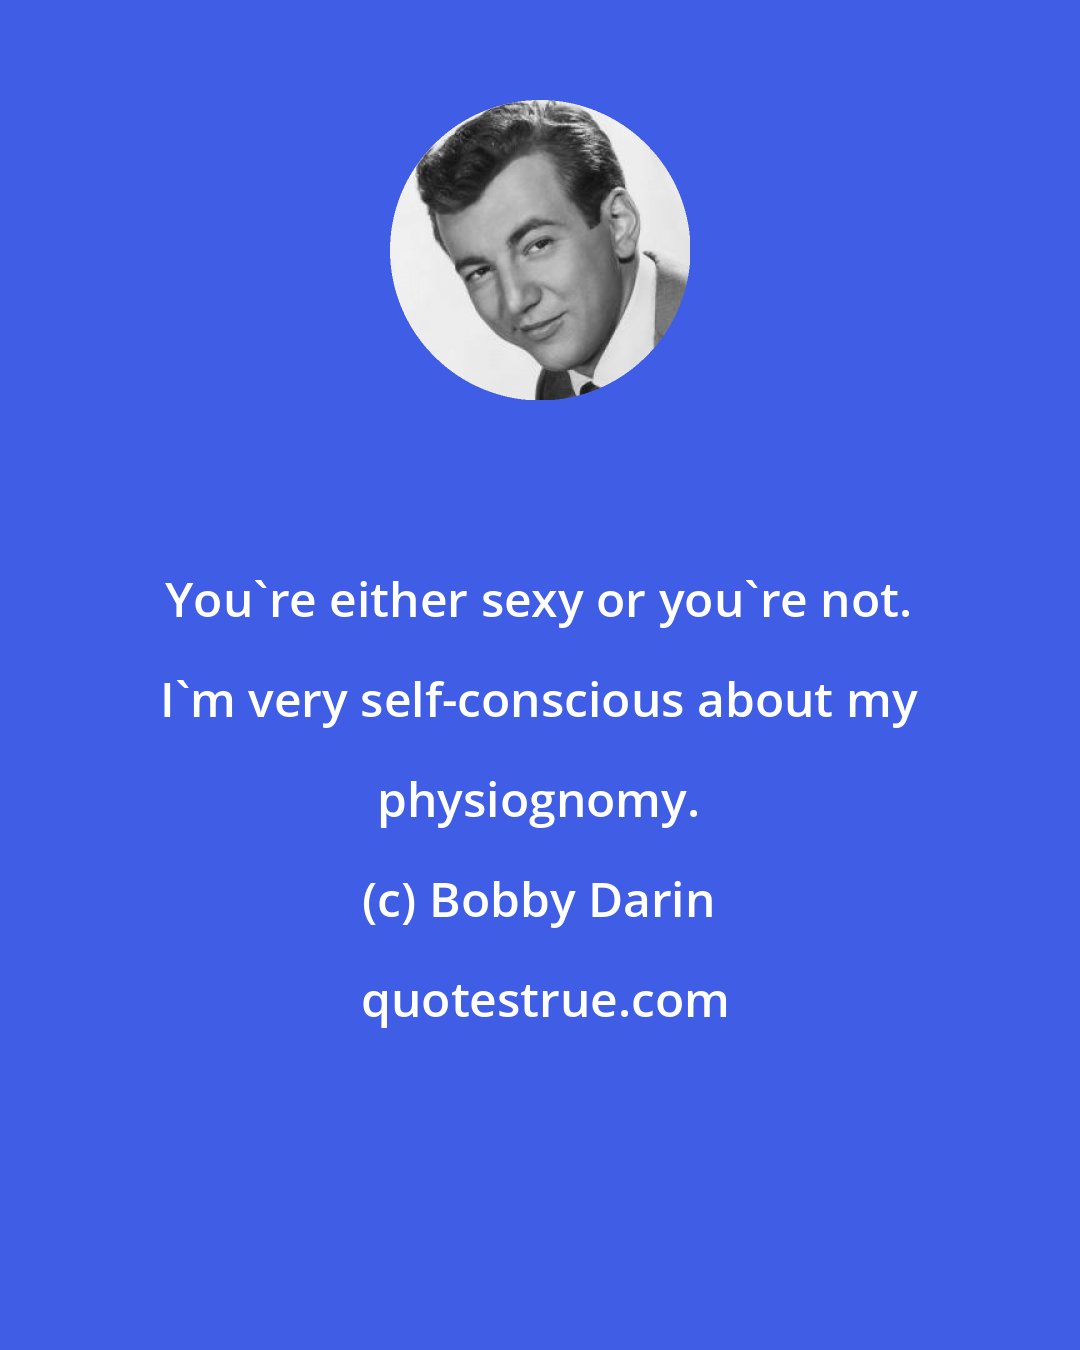 Bobby Darin: You're either sexy or you're not. I'm very self-conscious about my physiognomy.